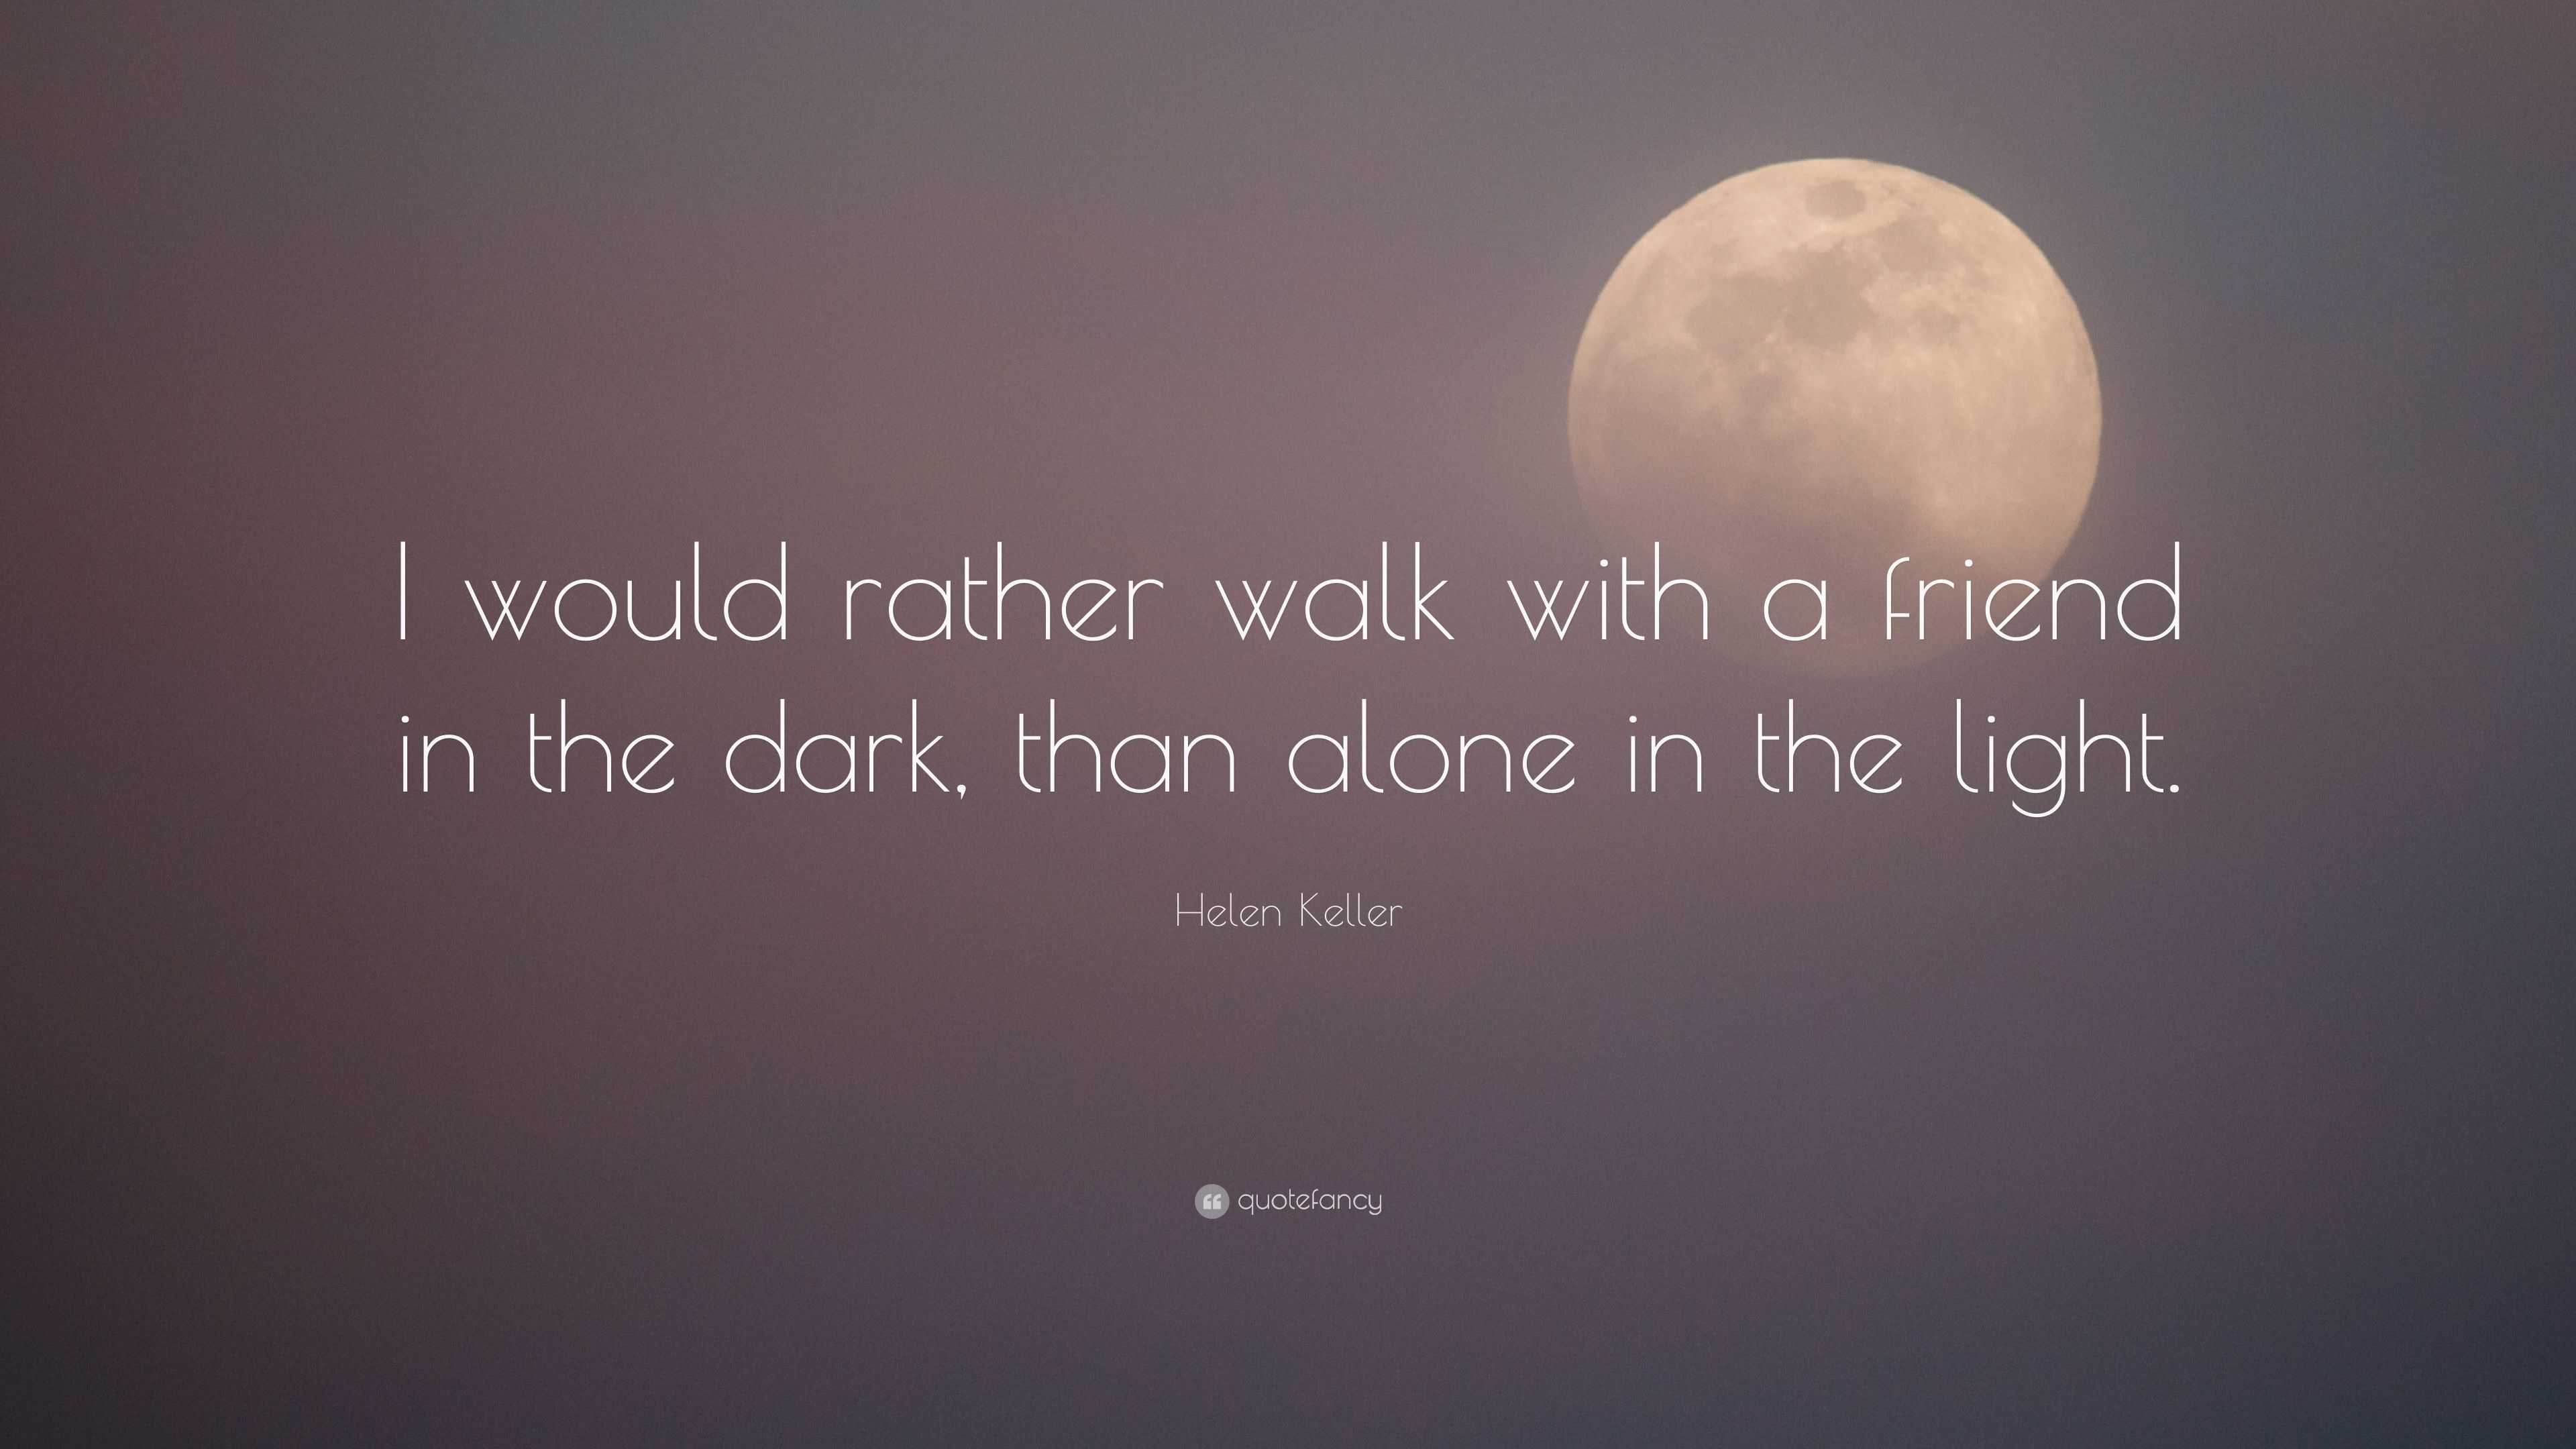 Helen Keller Quote I Would Rather Walk With A Friend In The Dark Than Alone In